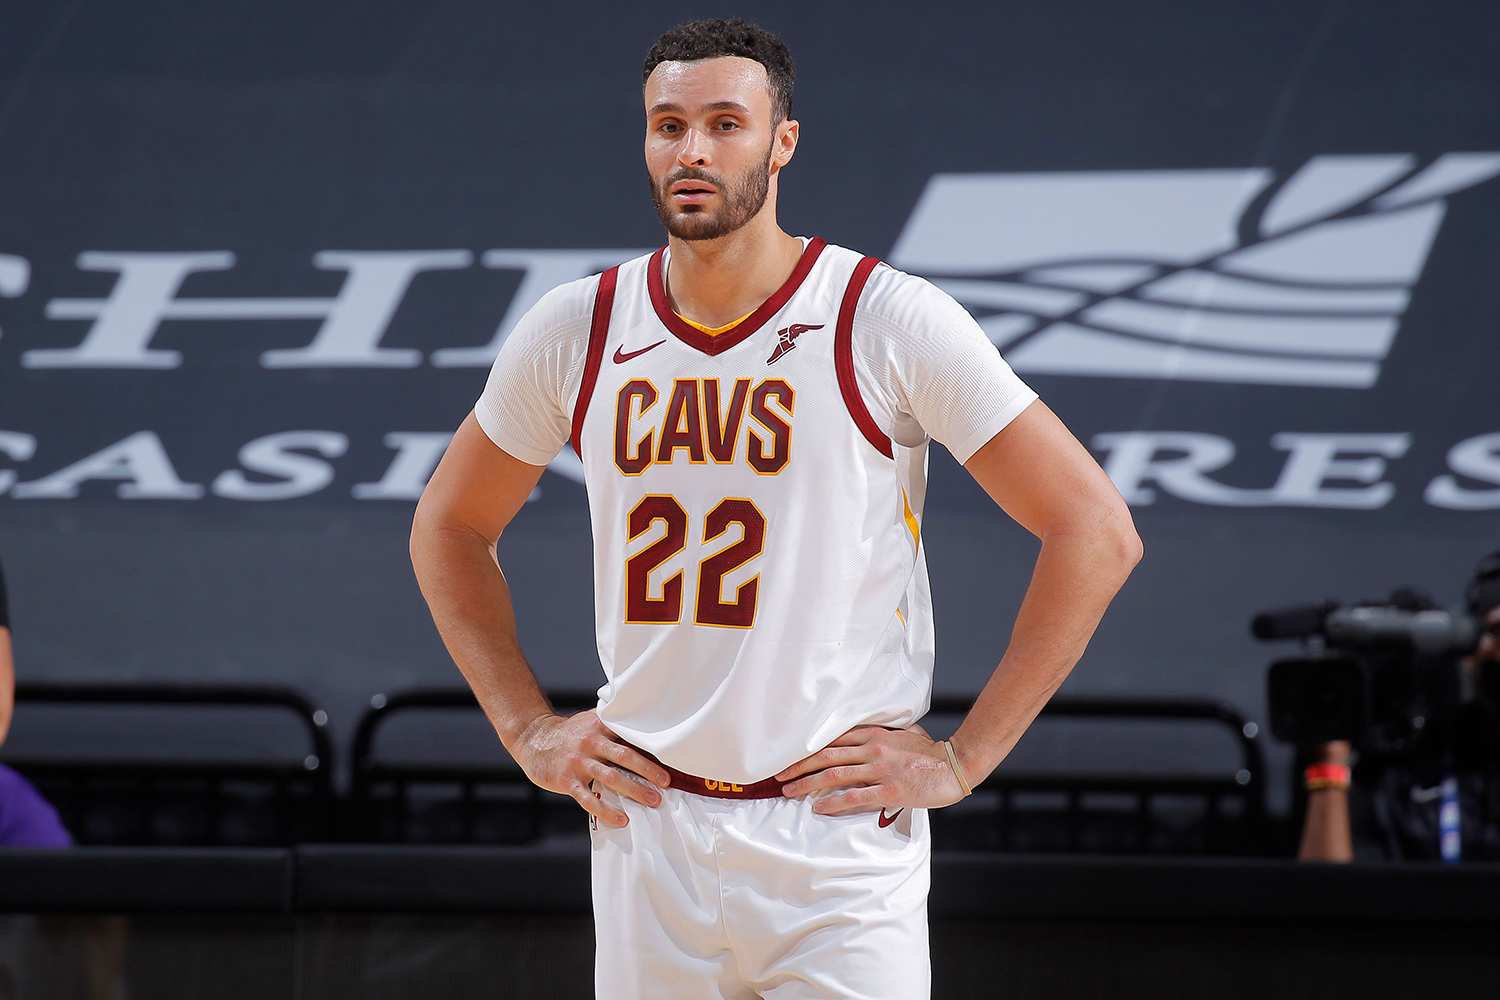 SACRAMENTO, CA - MARCH 27: Larry Nance Jr. #22 of the Cleveland Cavaliers looks on during the game against the Sacramento Kings on March 27, 2021 at Golden 1 Center in Sacramento, California. NOTE TO USER: User expressly acknowledges and agrees that, by downloading and or using this photograph, User is consenting to the terms and conditions of the Getty Images Agreement. Mandatory Copyright Notice: Copyright 2021 NBAE (Photo by Rocky Widner/NBAE via Getty Images)